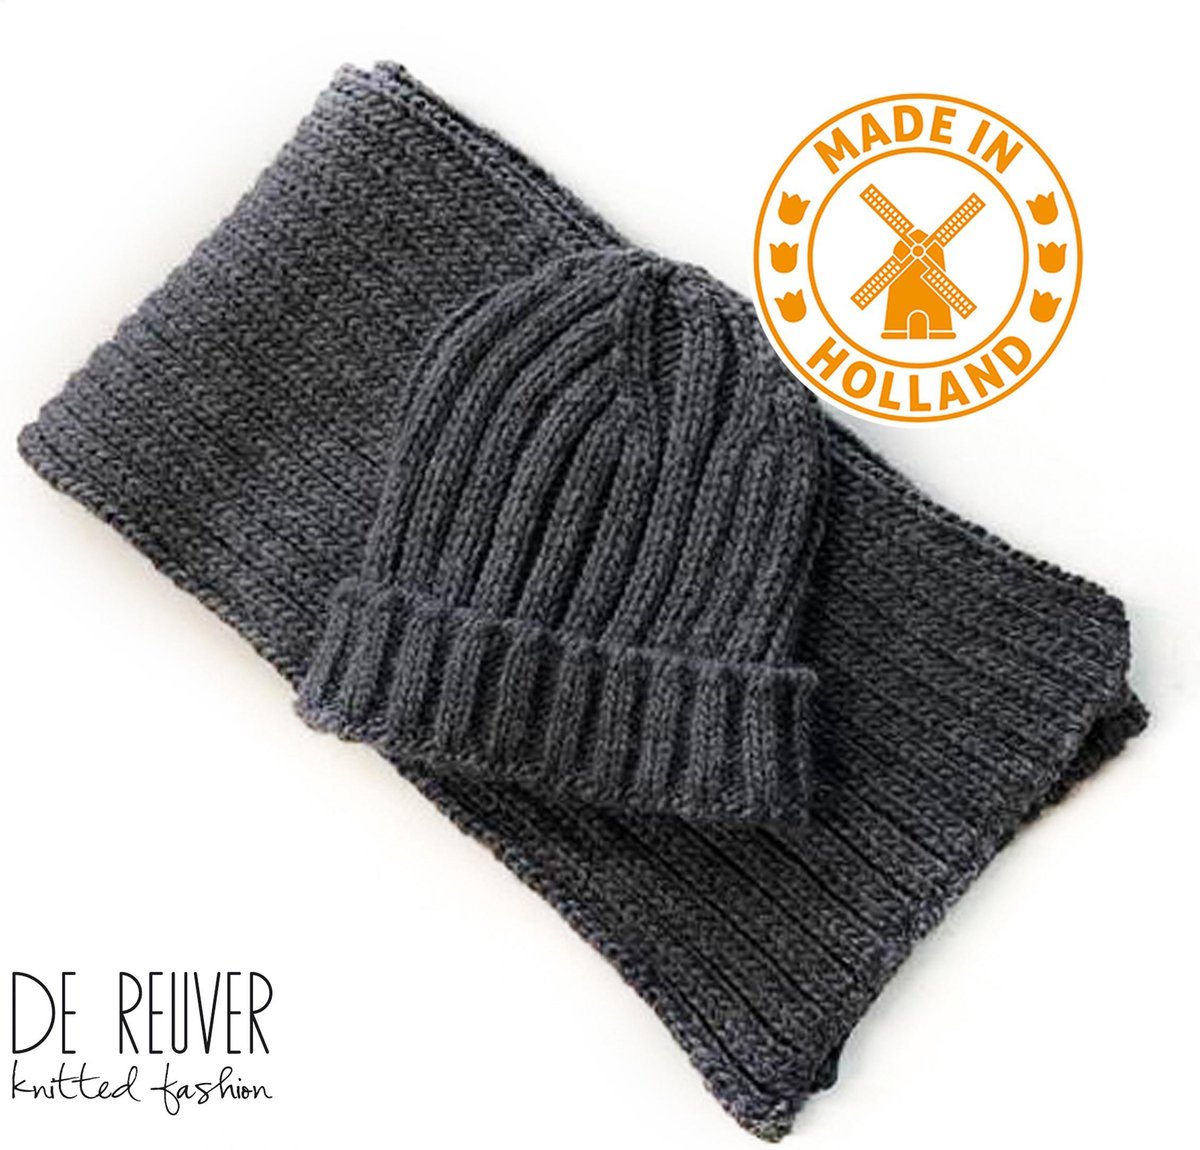 De Reuver Knitted Fashion HEREN SJAAL MUTS 100% NED. (227)